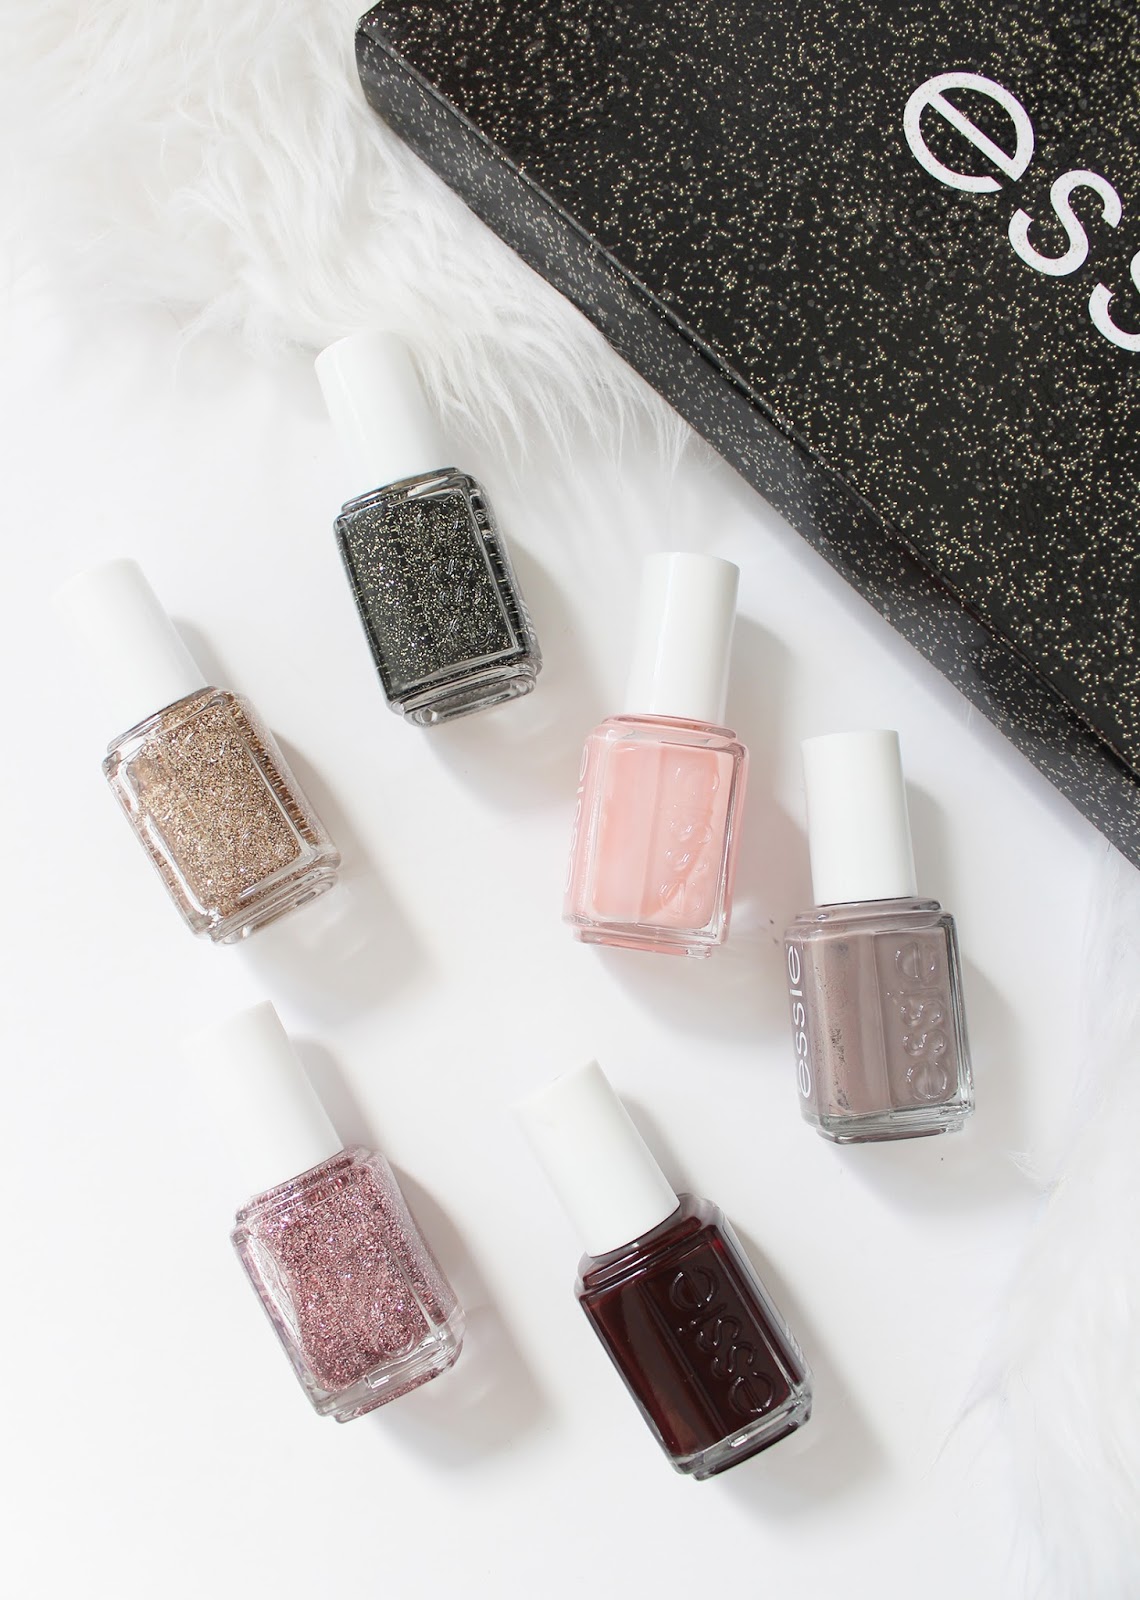 ESSIE | Fall Polish Collection - Review + Swatches - CassandraMyee